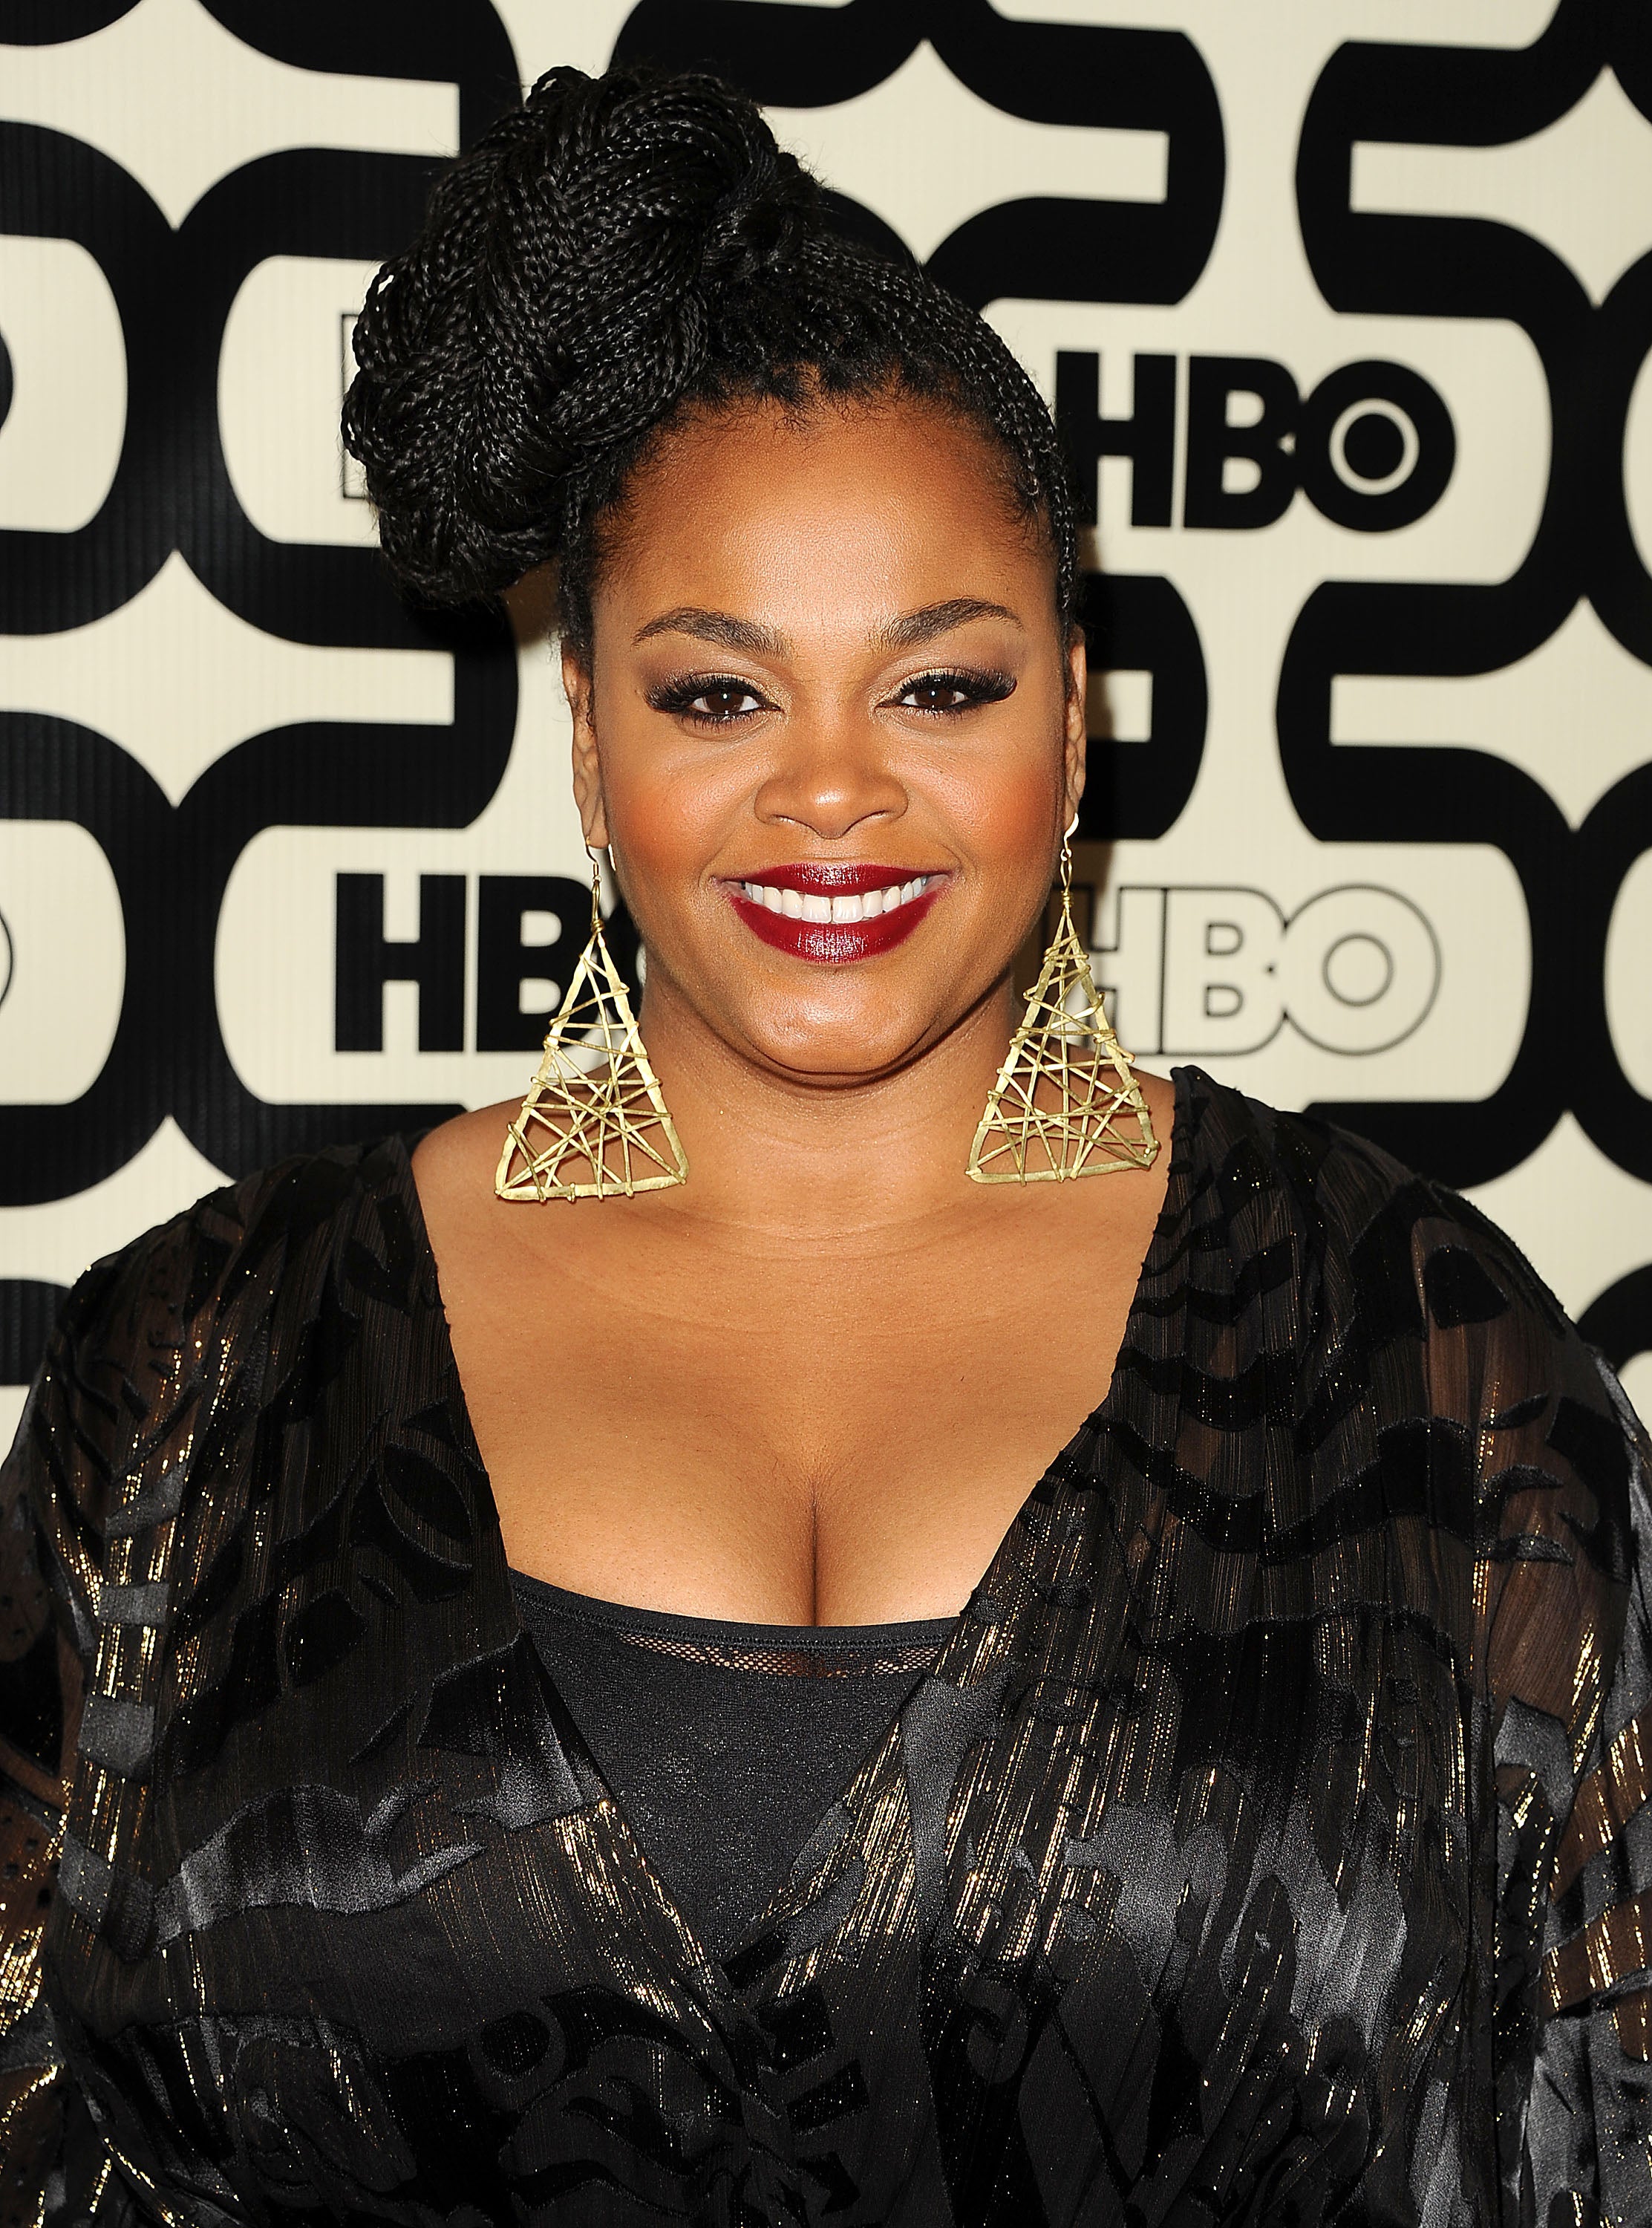 Jill Scott Teams up With Usher for 'The Voice'